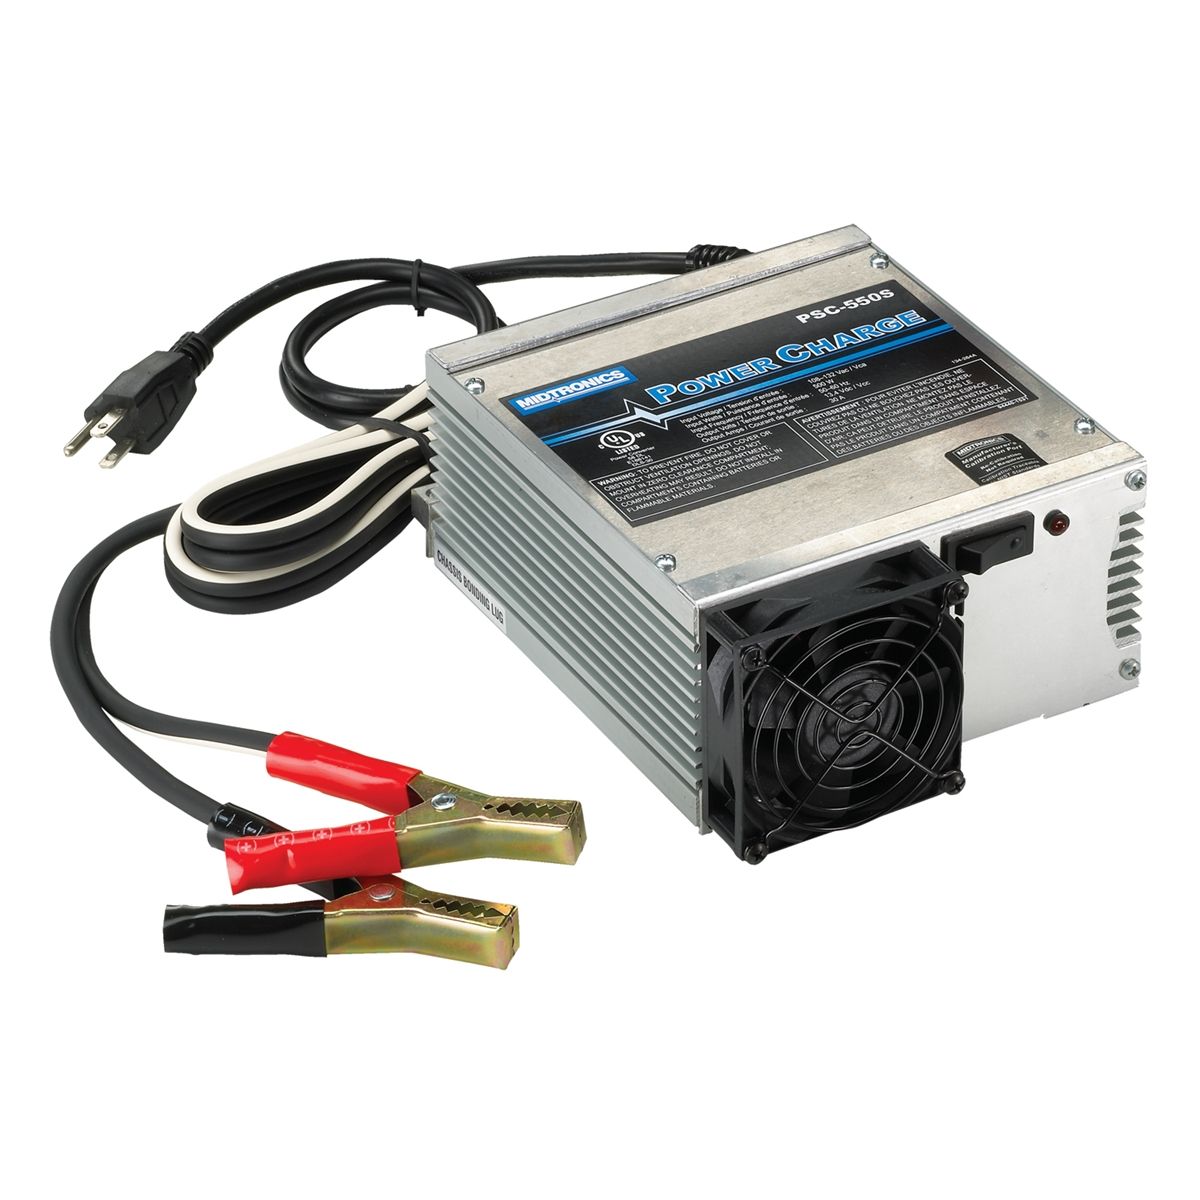 PSC-550S KIT Power Supply/Battery Charger Midtronics 